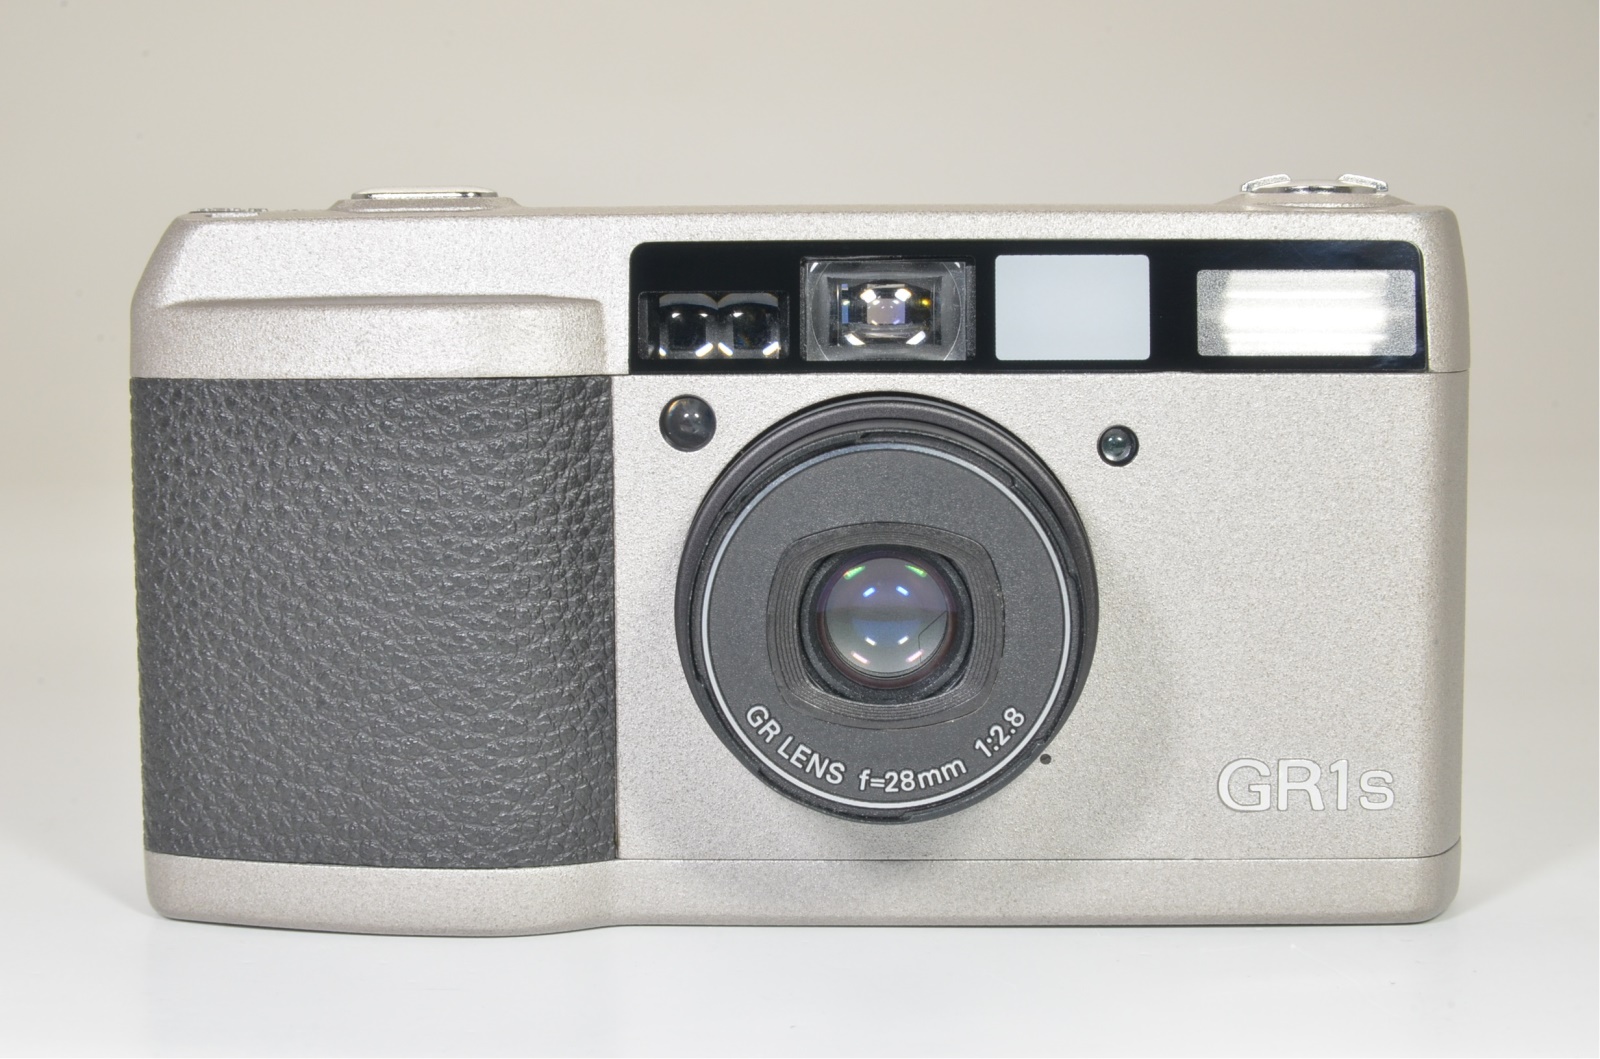 RICOH GR1s Date Silver 28mm f2.8 P&S film camera from Japan